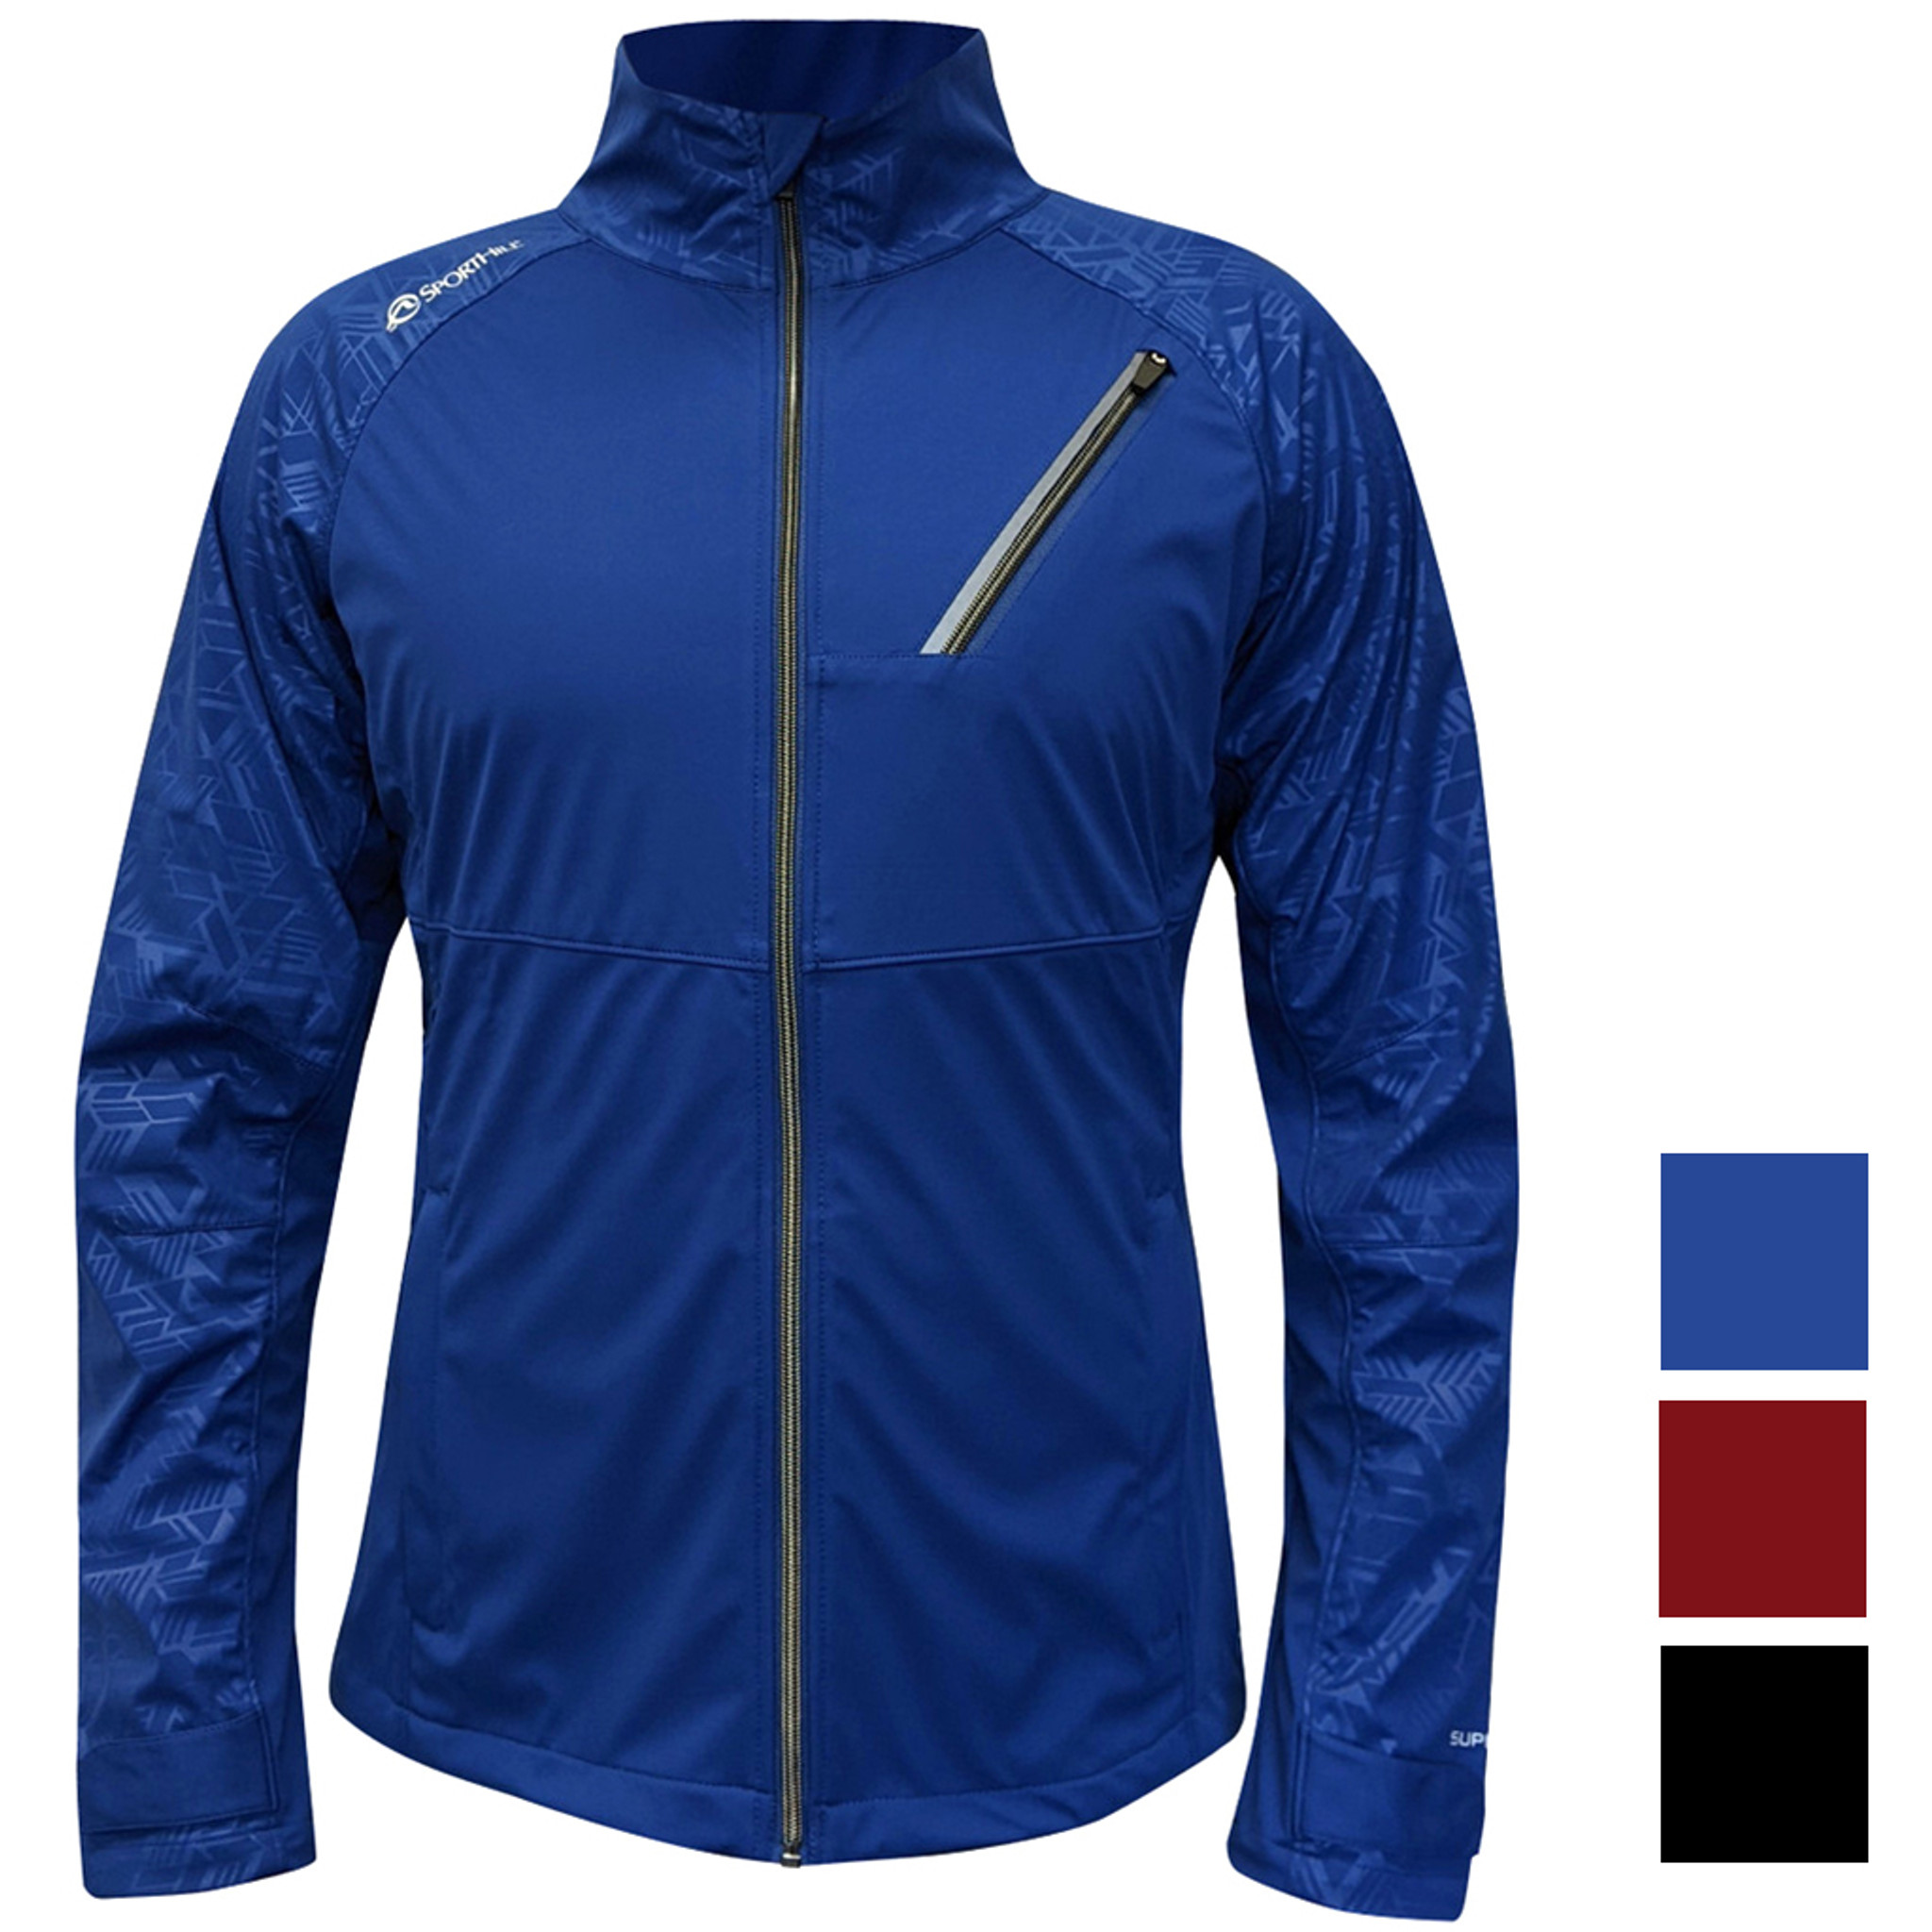 Men's Super XC Jacket - SportHill® Direct – The Performance Never